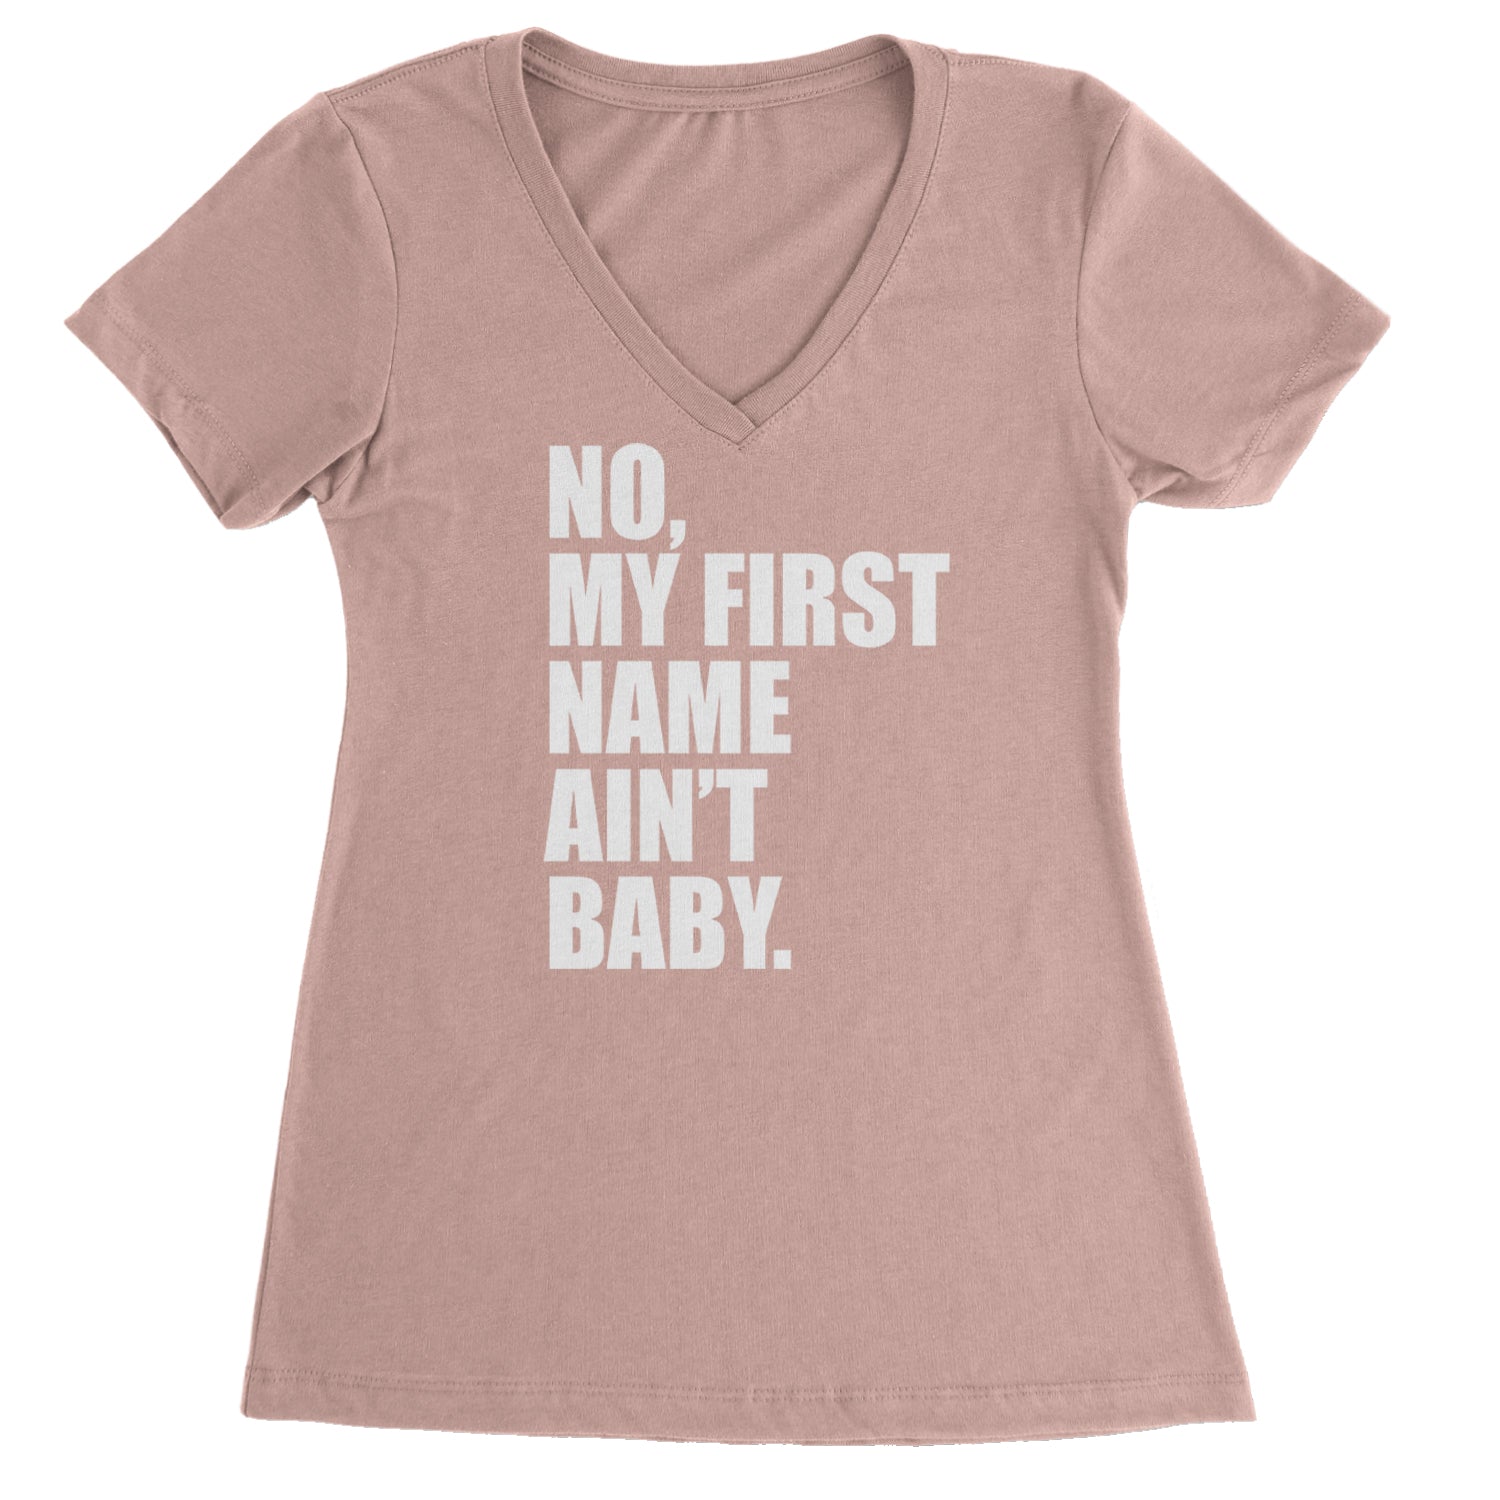 No My First Name Ain't Baby Together Again Ladies V-Neck T-shirt Light Pink